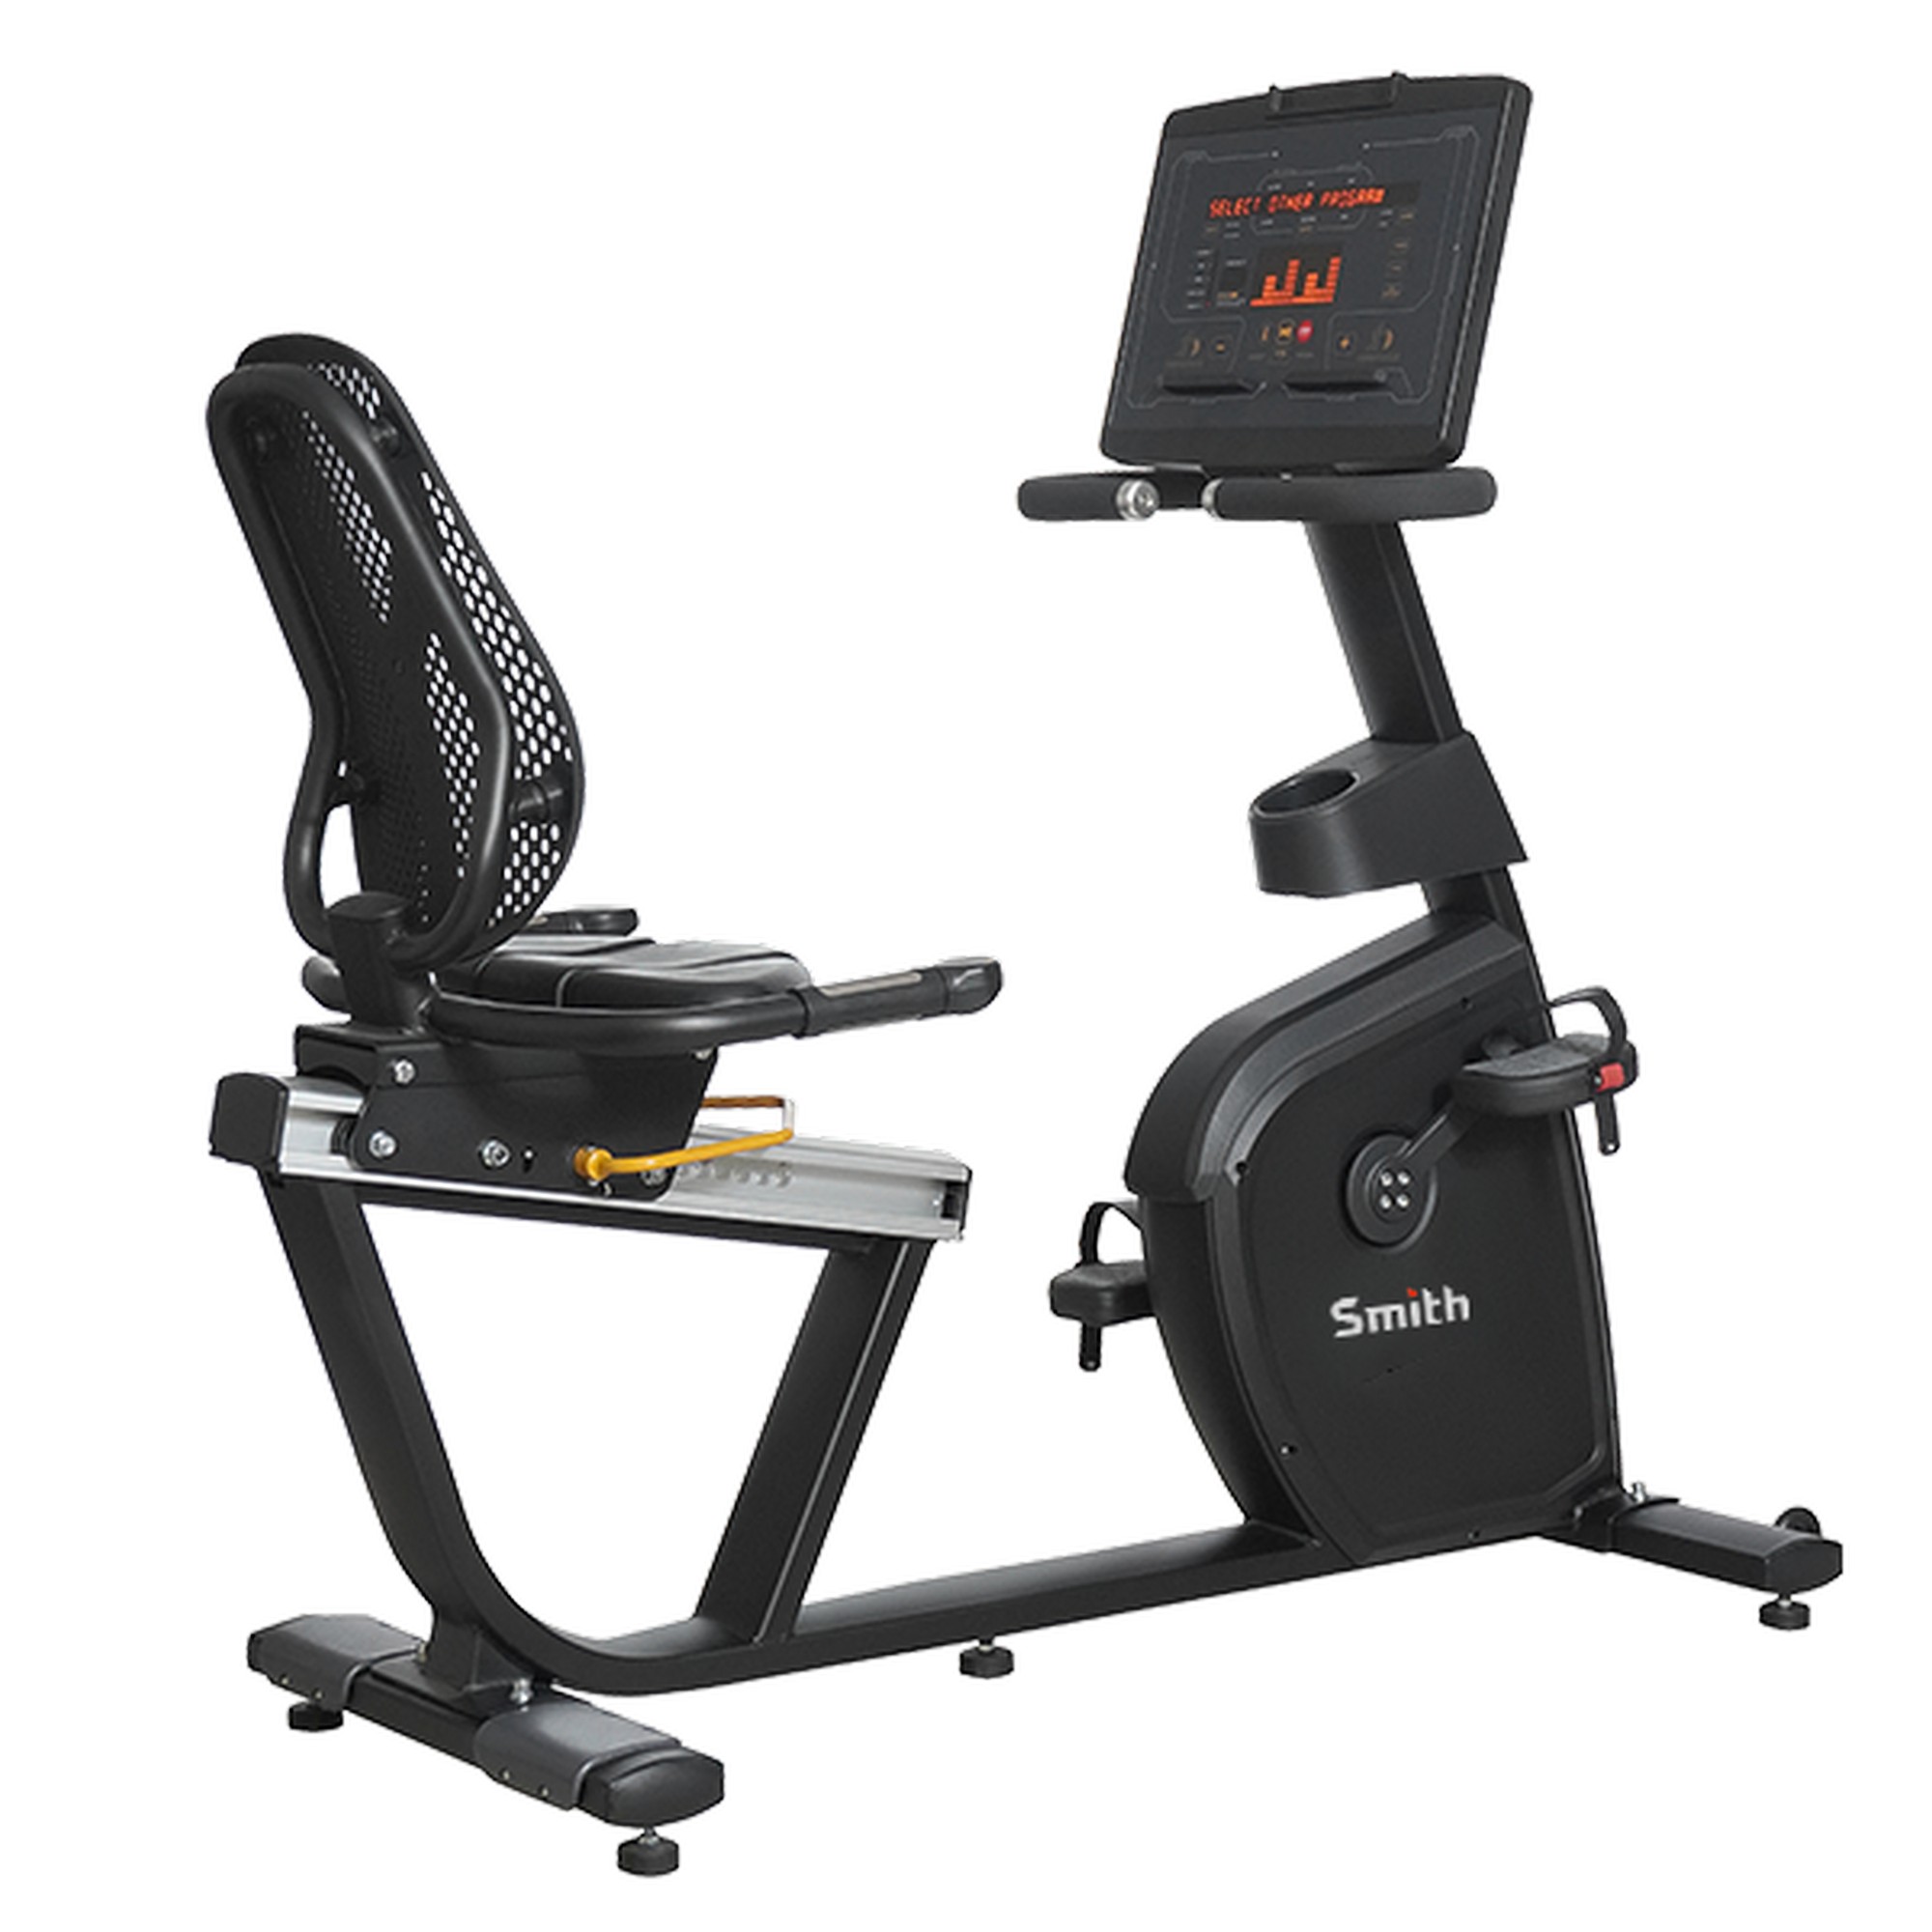   Smith Fitness RCB300